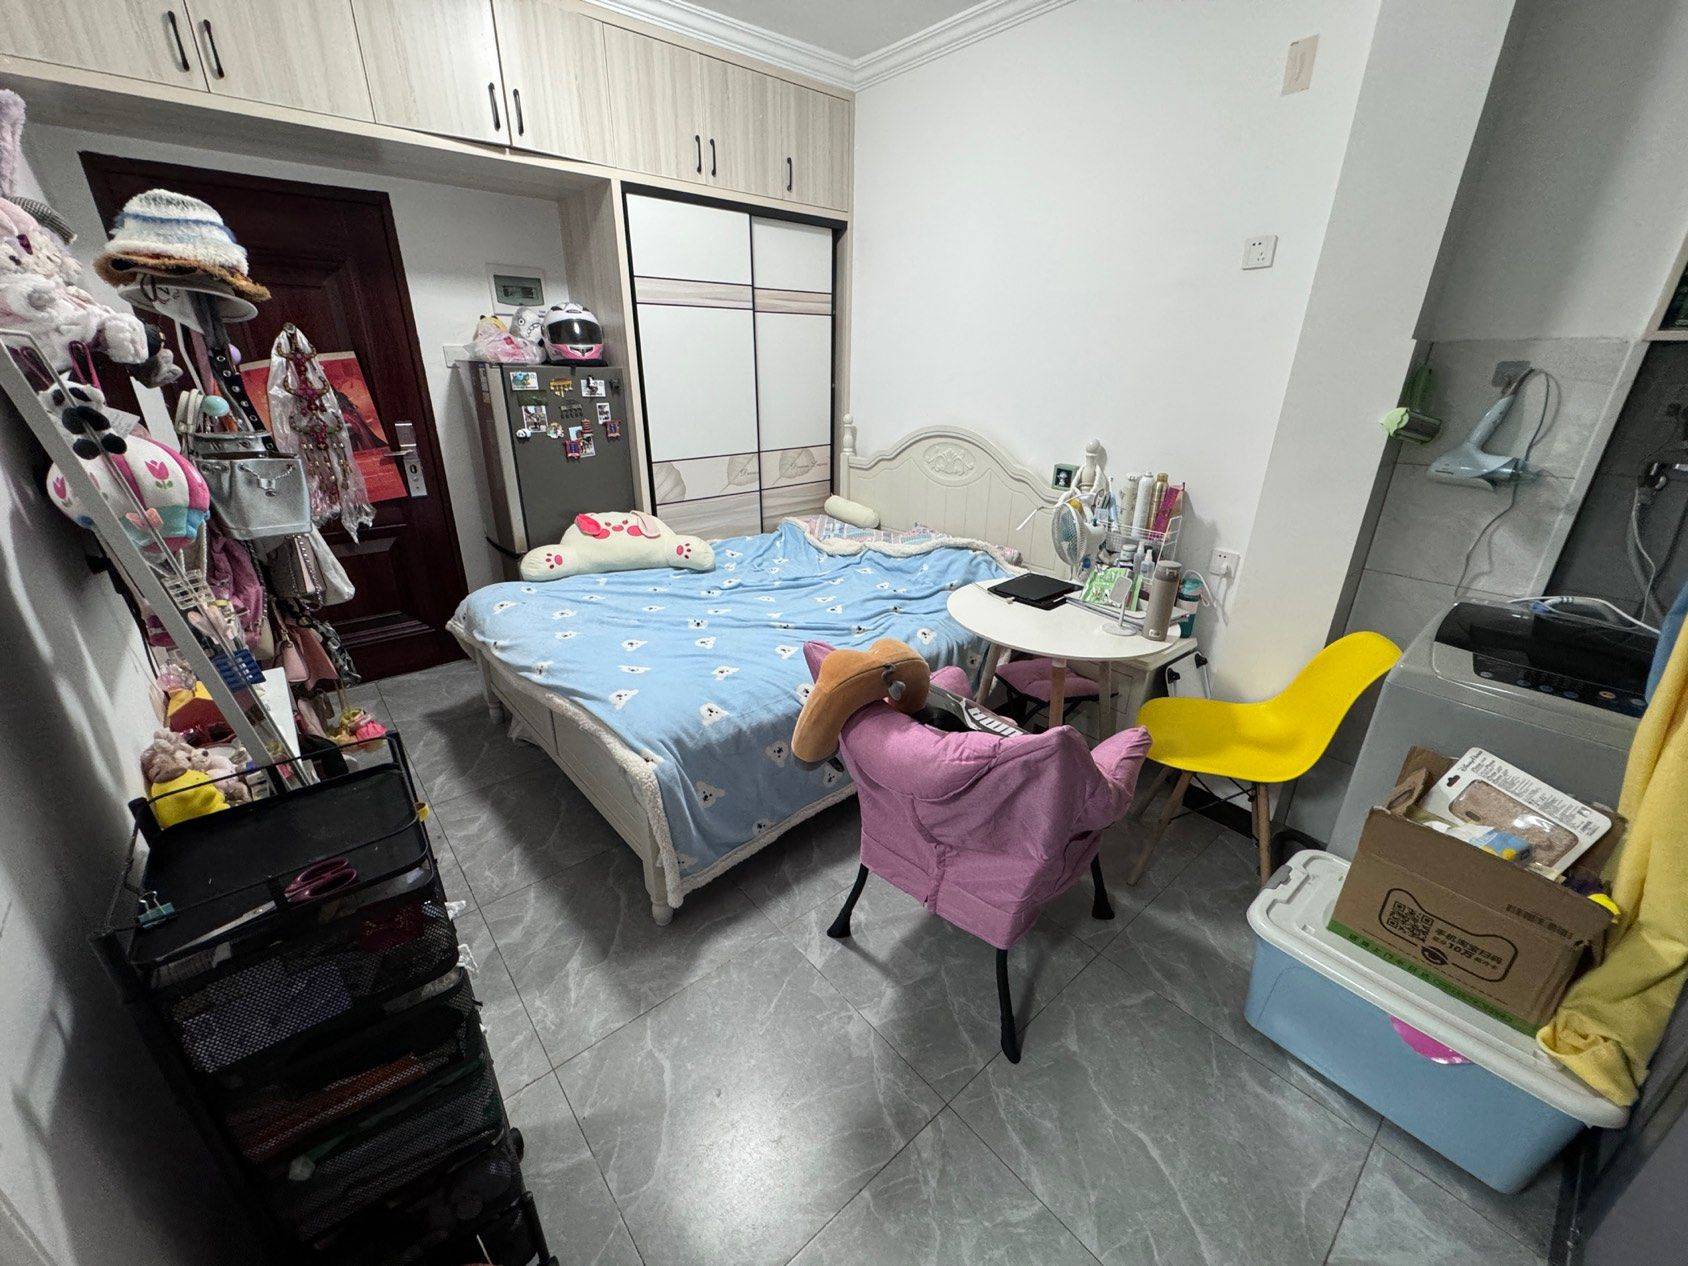 Changsha-Wangcheng-Cozy Home,Clean&Comfy,No Gender Limit,Chilled